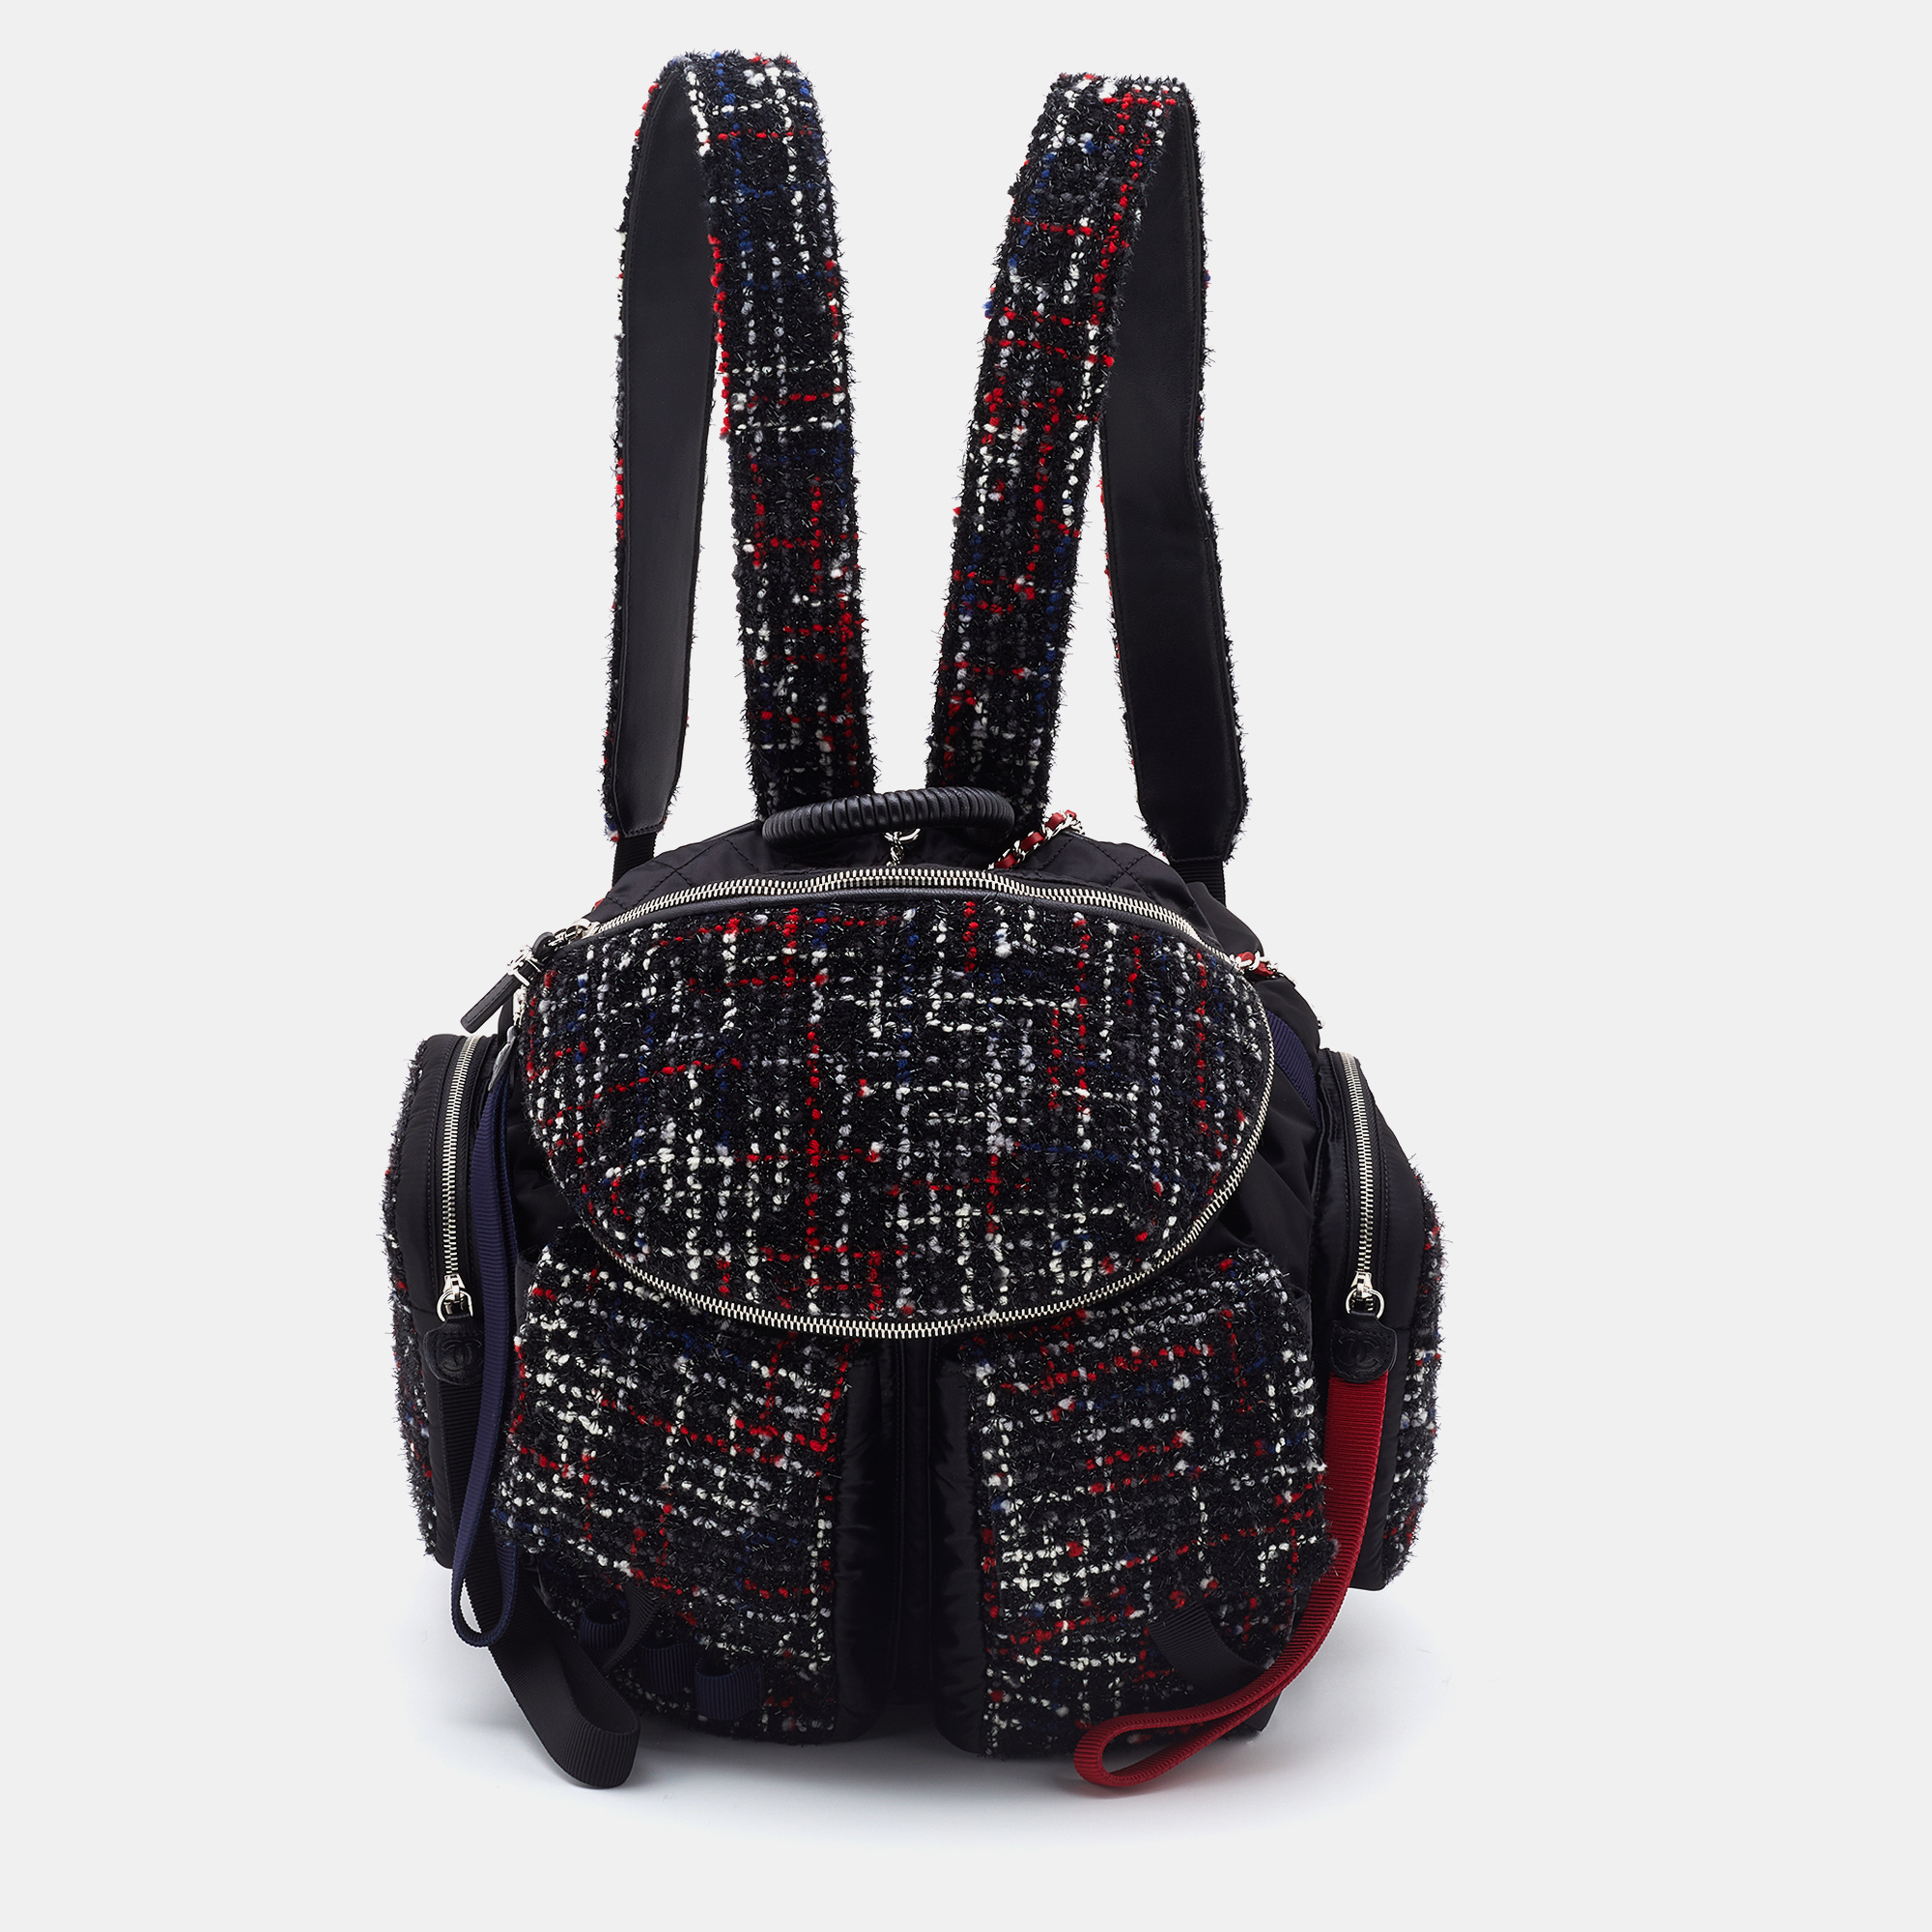 Chanel Black/Red Satin,Tweed And Leather Astronaut Essentials Backpack